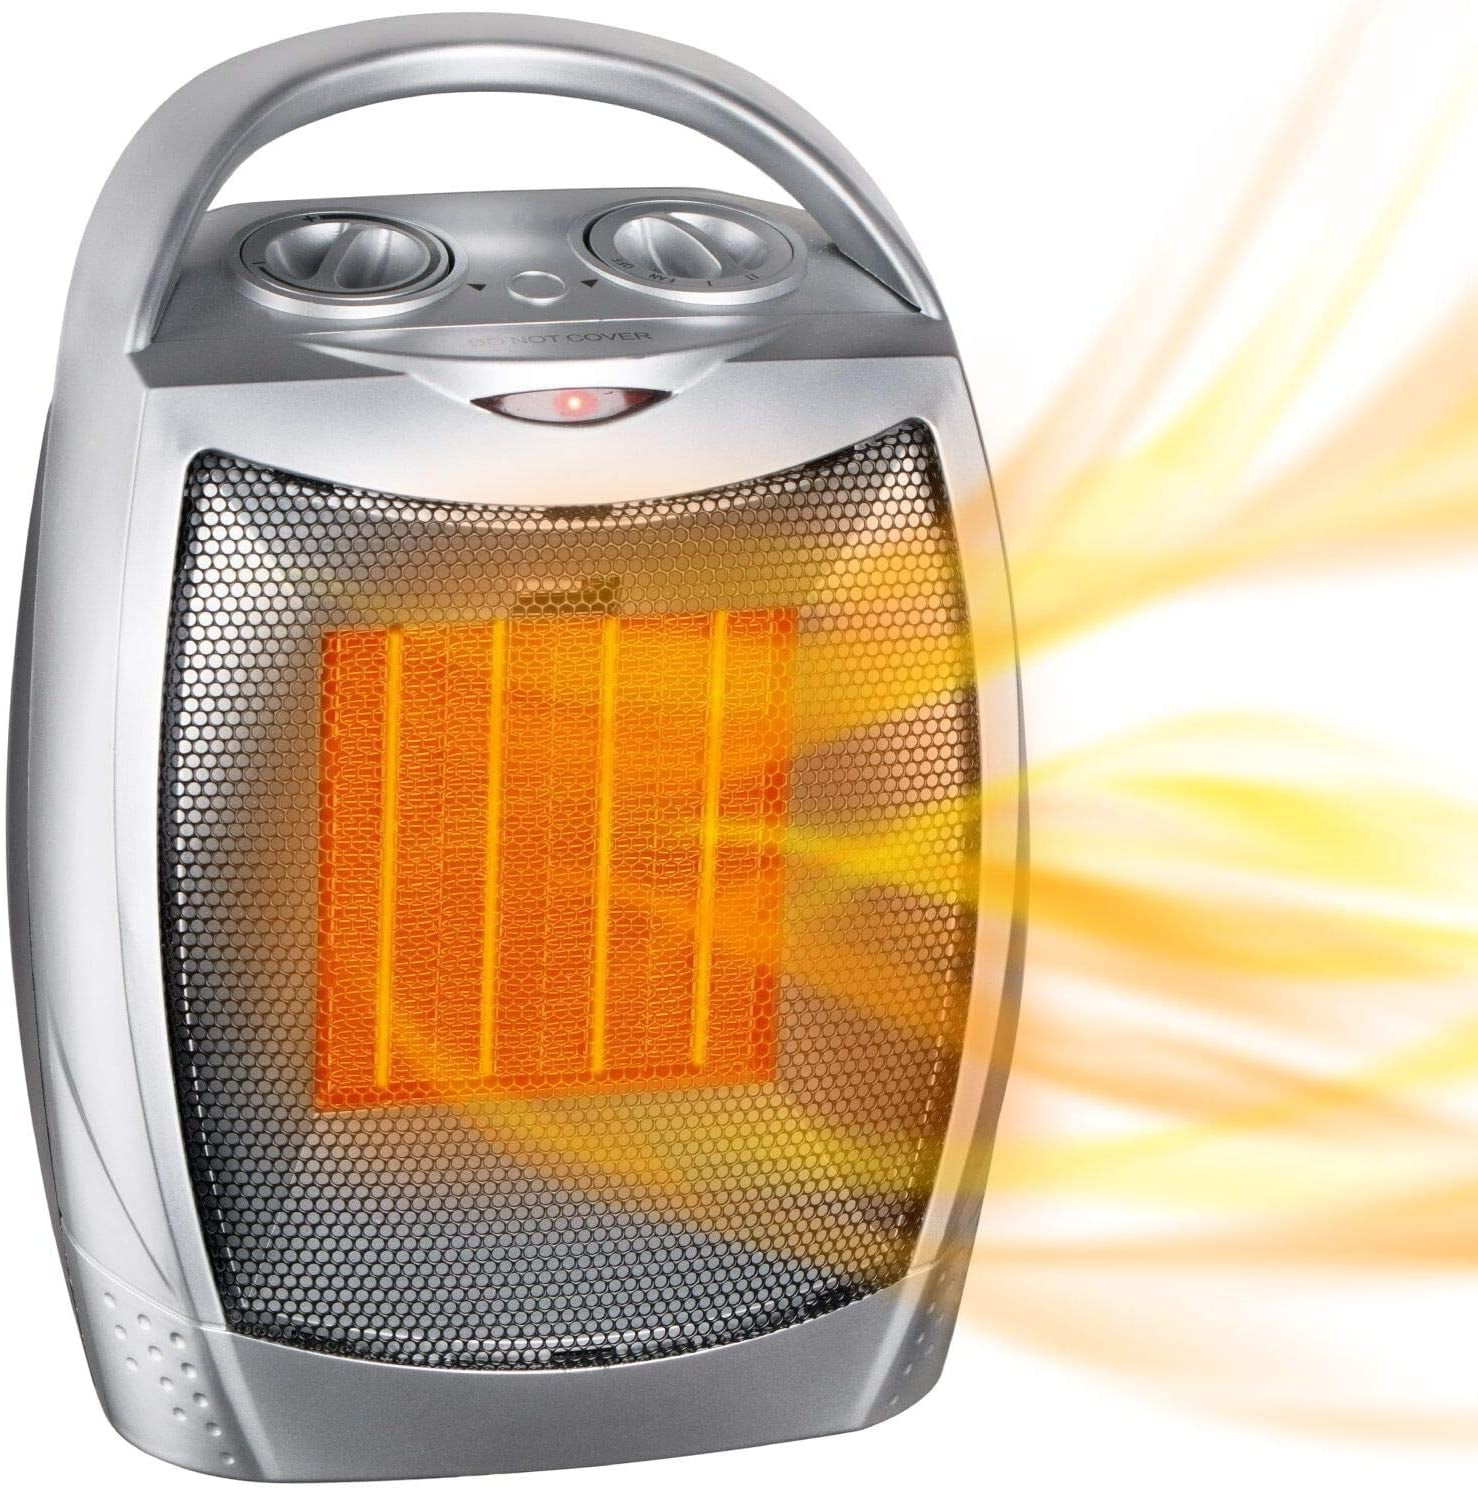 Handy Heater, Personal Electric Ceramic Space Heater, 350 Watts 